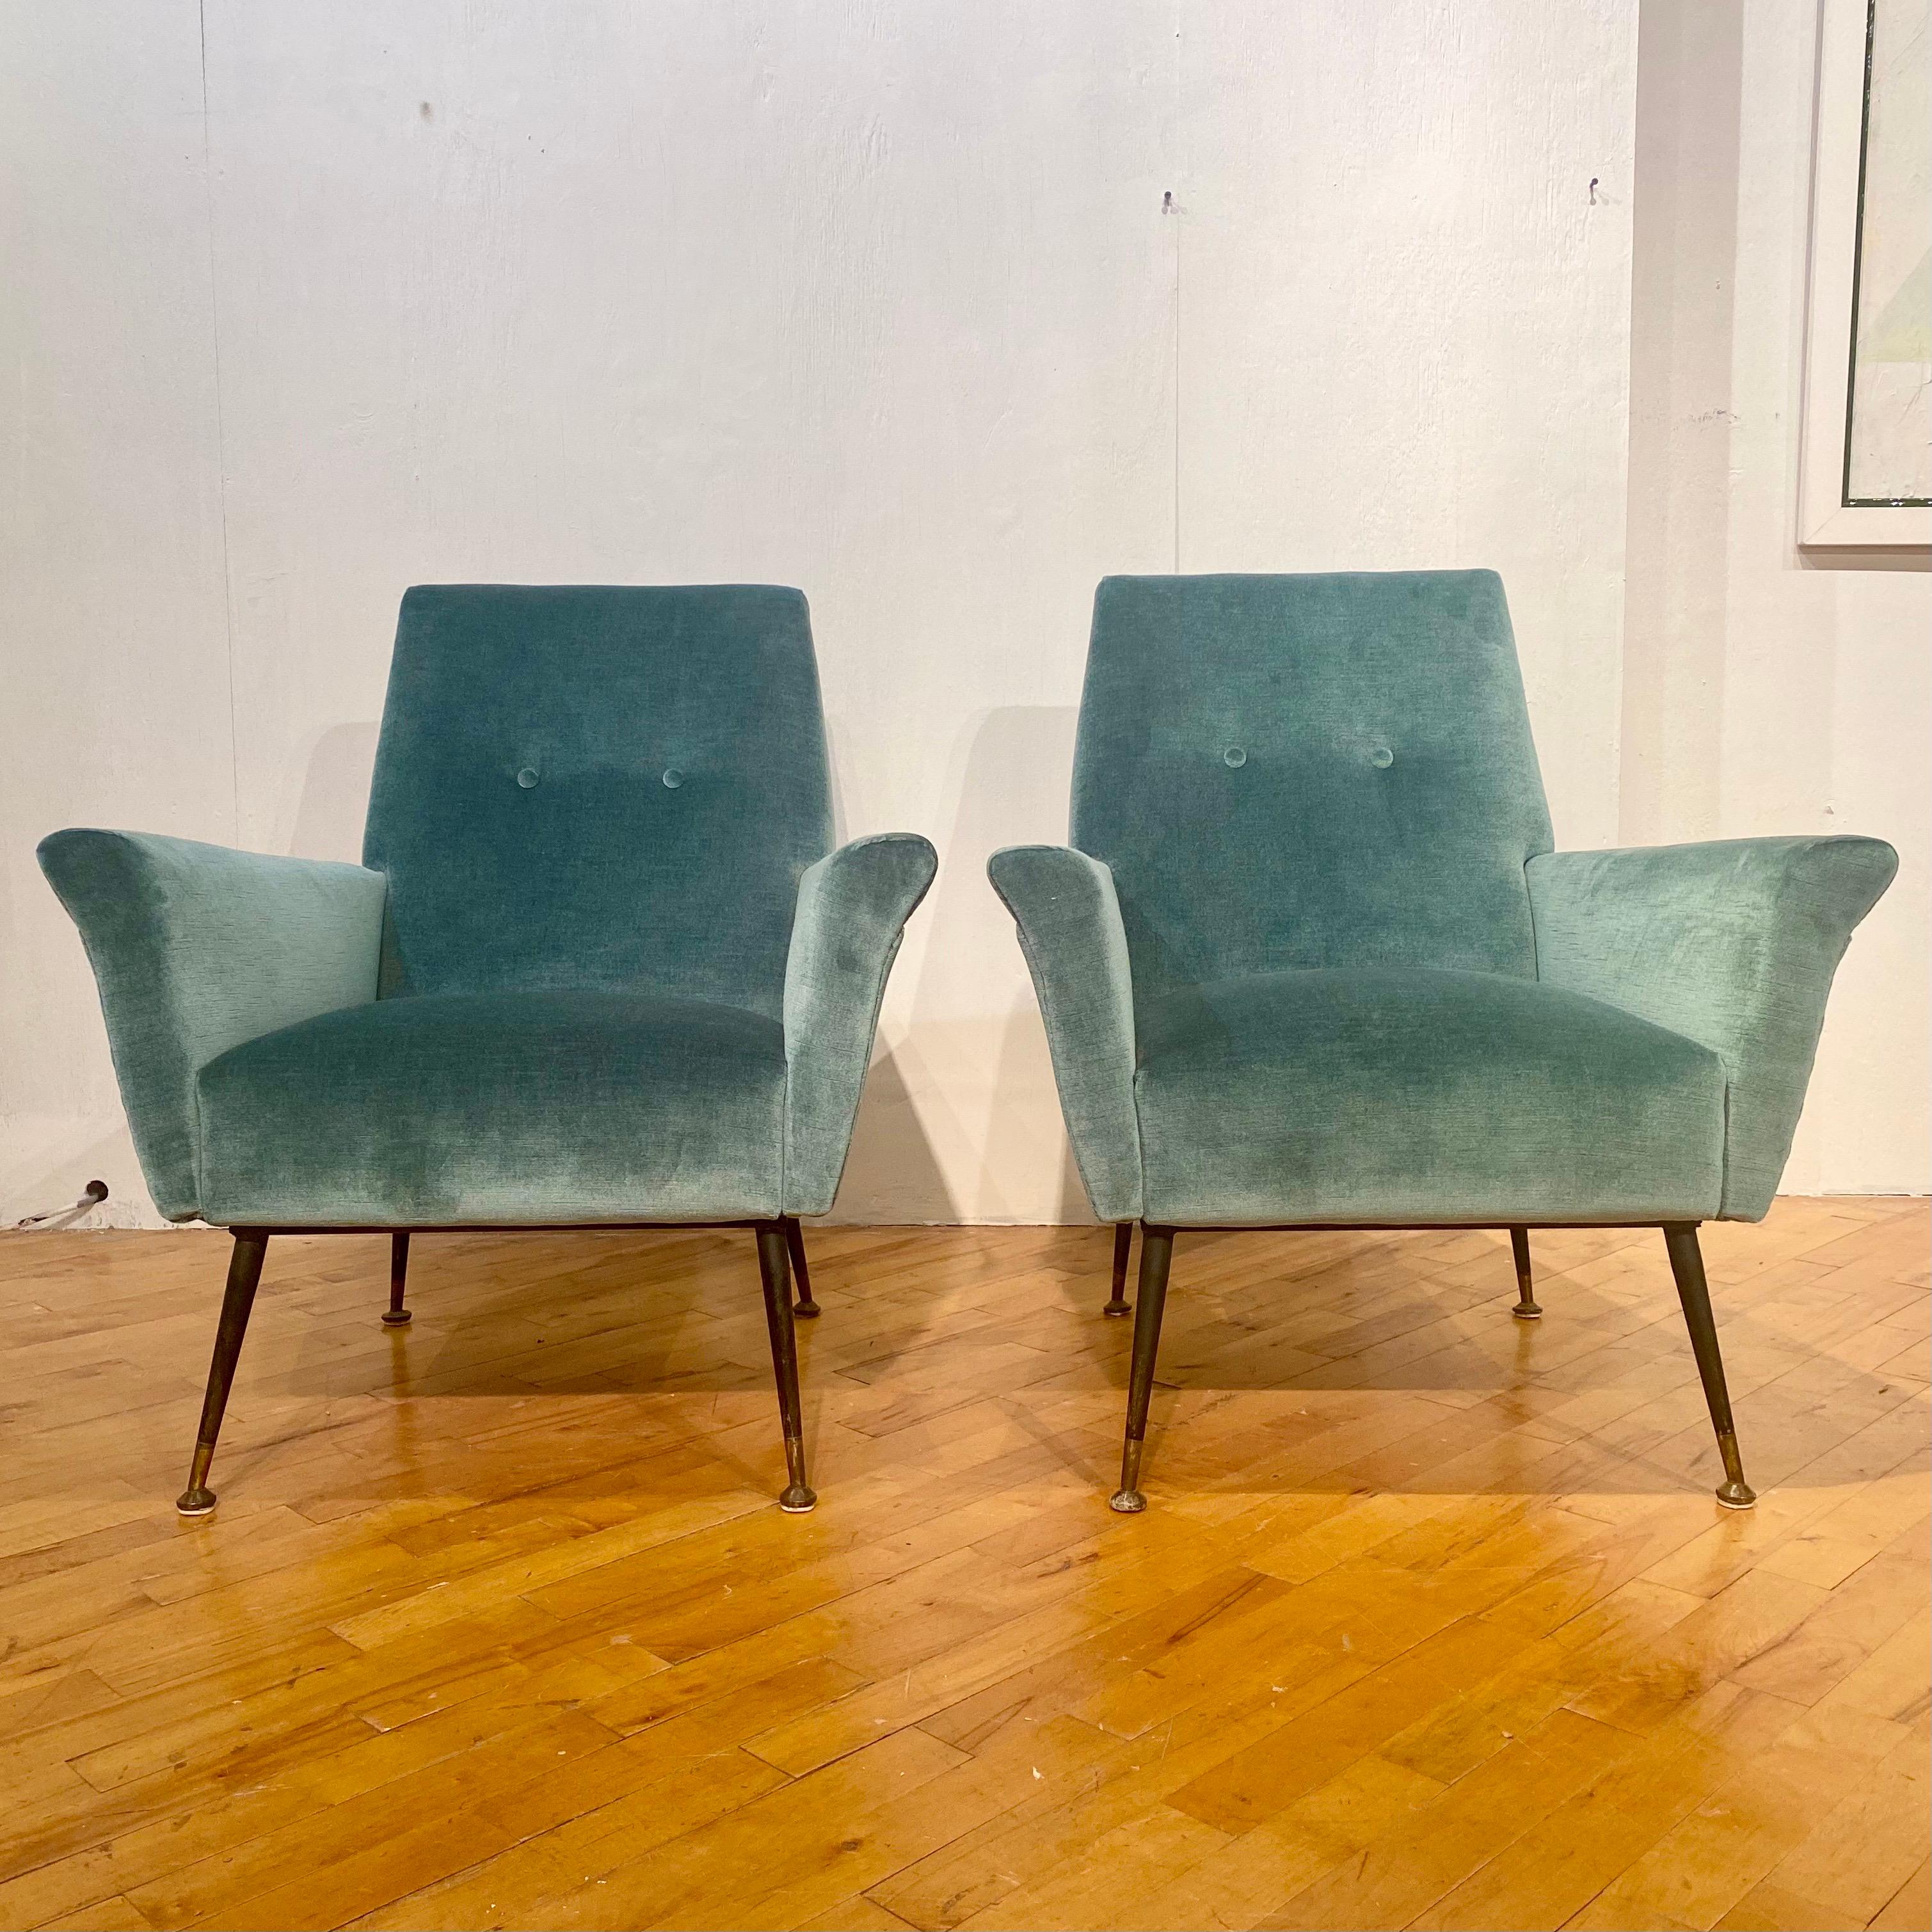 Outstanding vintage pair of Italian lounge chairs, fully restored. Velvet upholstery with brass tipped feet. Recently restored and imported from Italy.